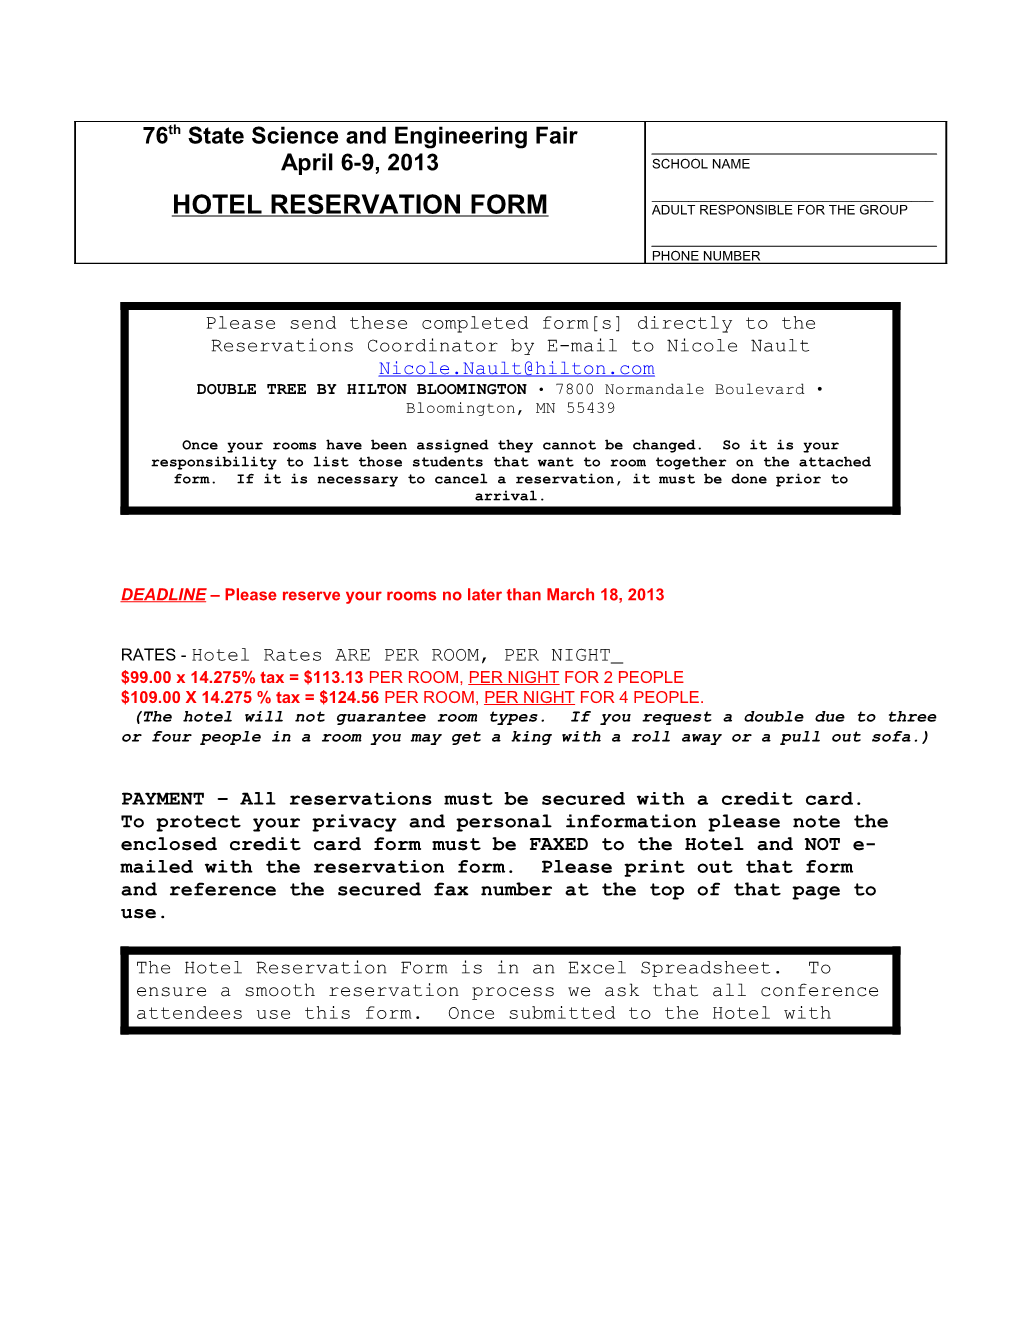 Please Send Thesecompleted Form S Directly to the Reservations Coordinator by E-Mail To